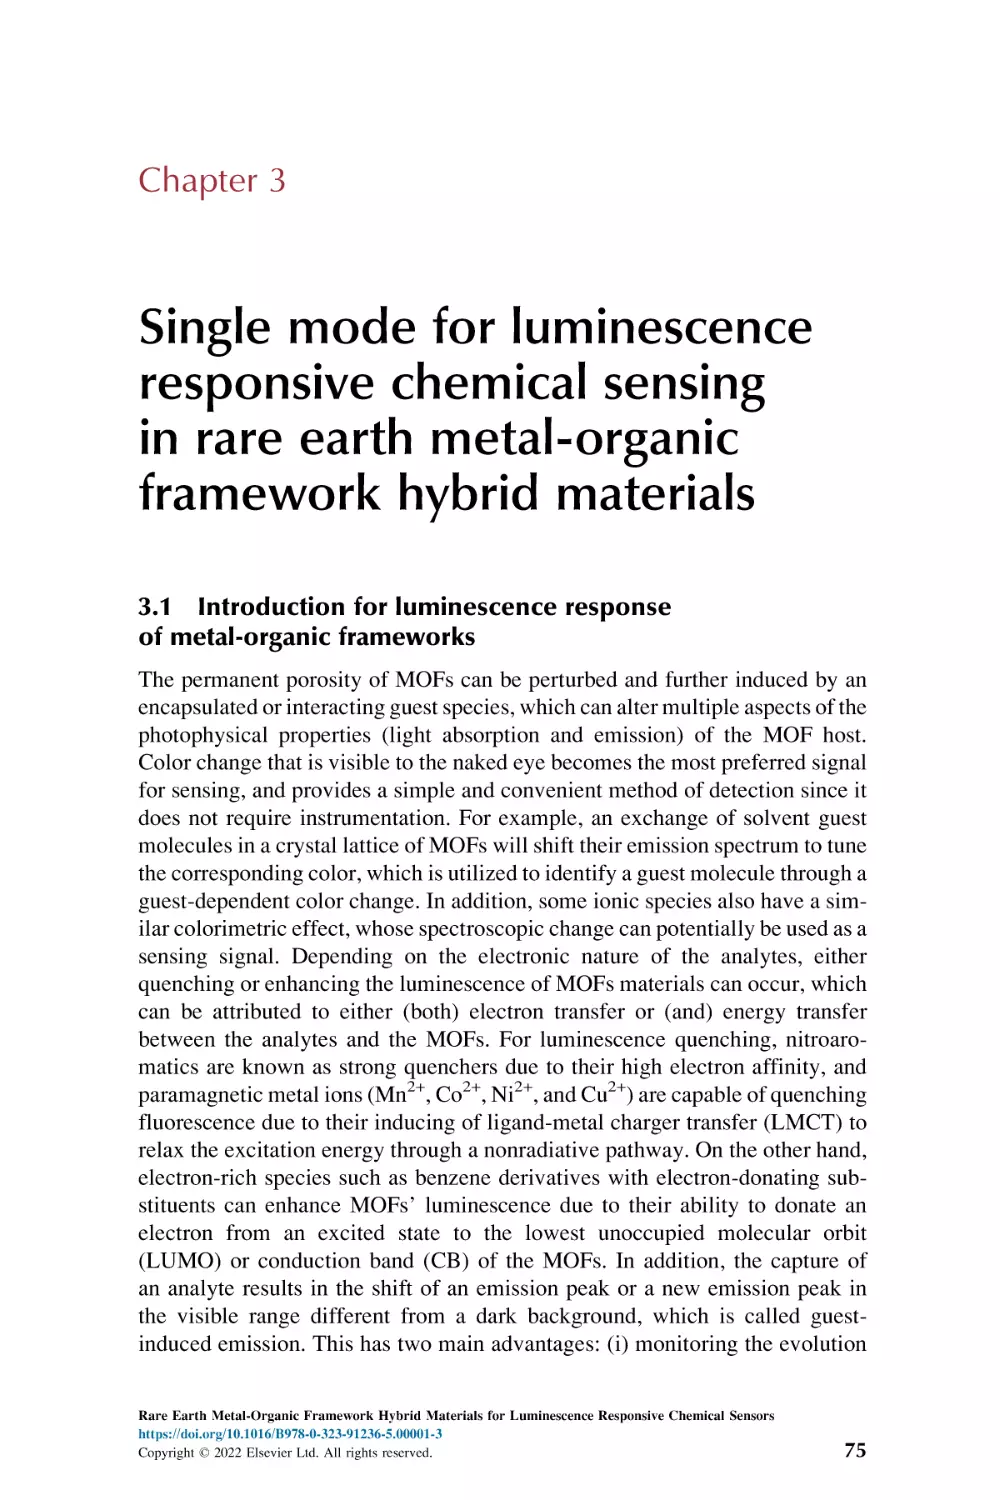 Chapter 3
3.1. Introduction for luminescence response of metal-organic frameworks